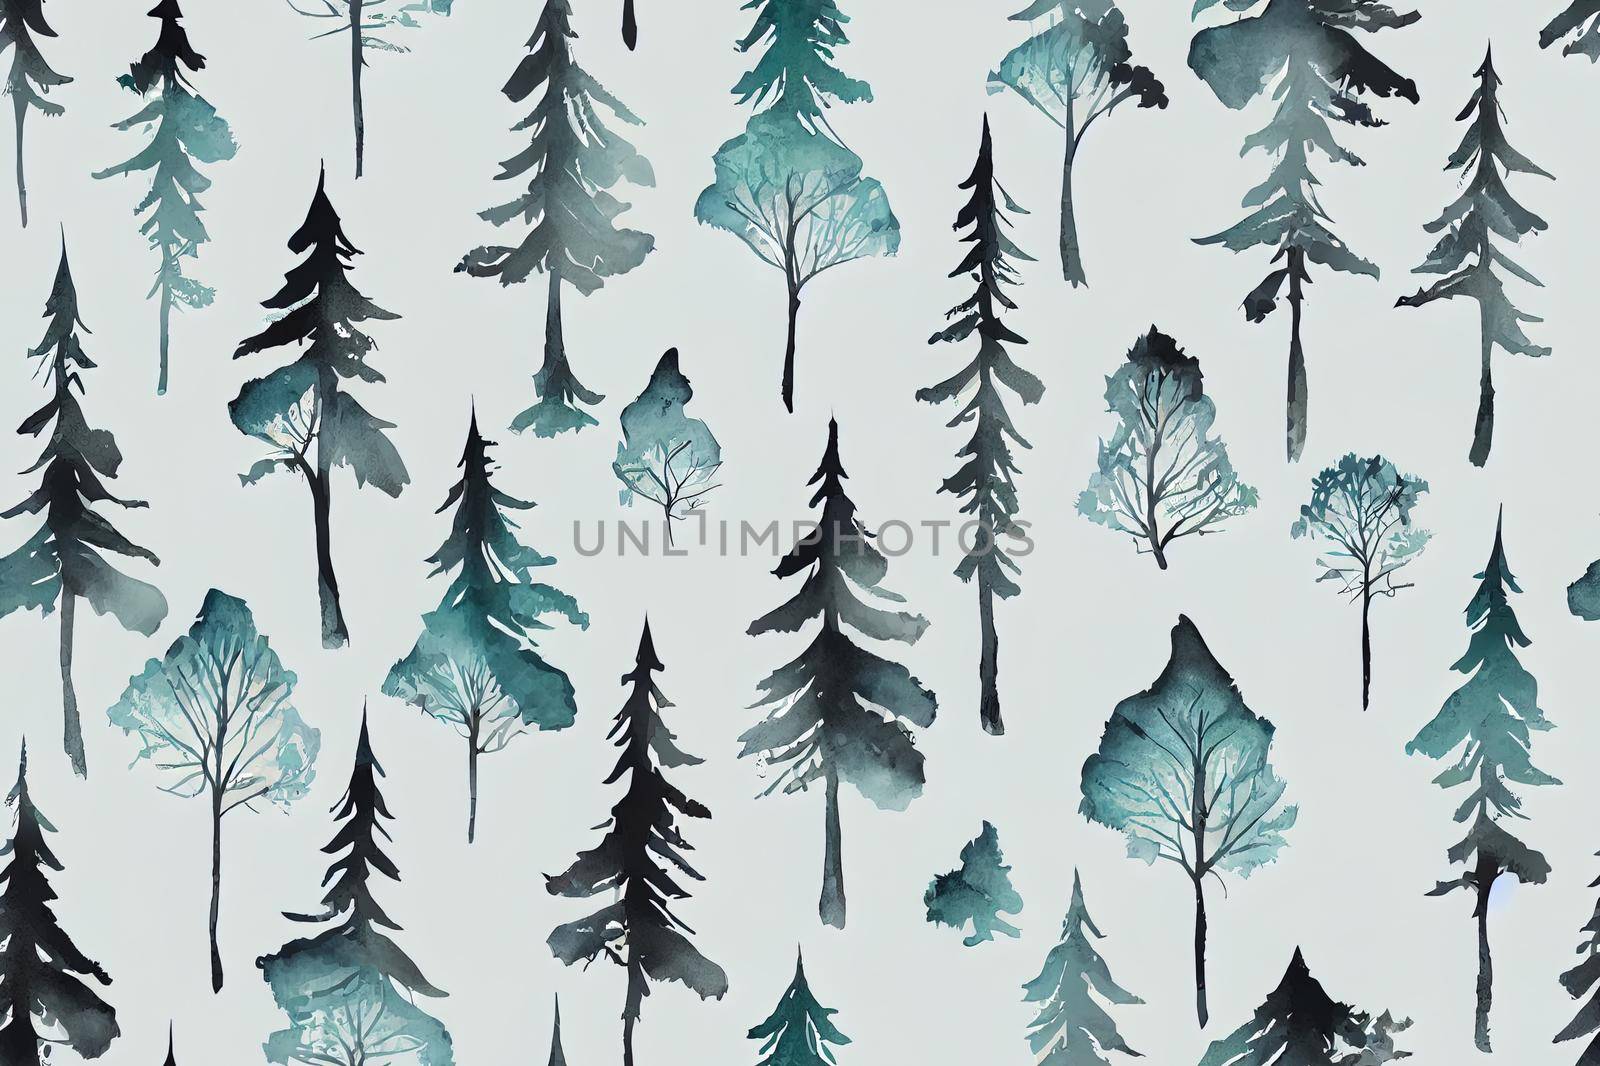 Wild forest animals seamless pattern Watercolor image Hand drawn forest bear wolf rabbit badgerfir trees mountains Seamless pattern for fabric paper tixtile print White background